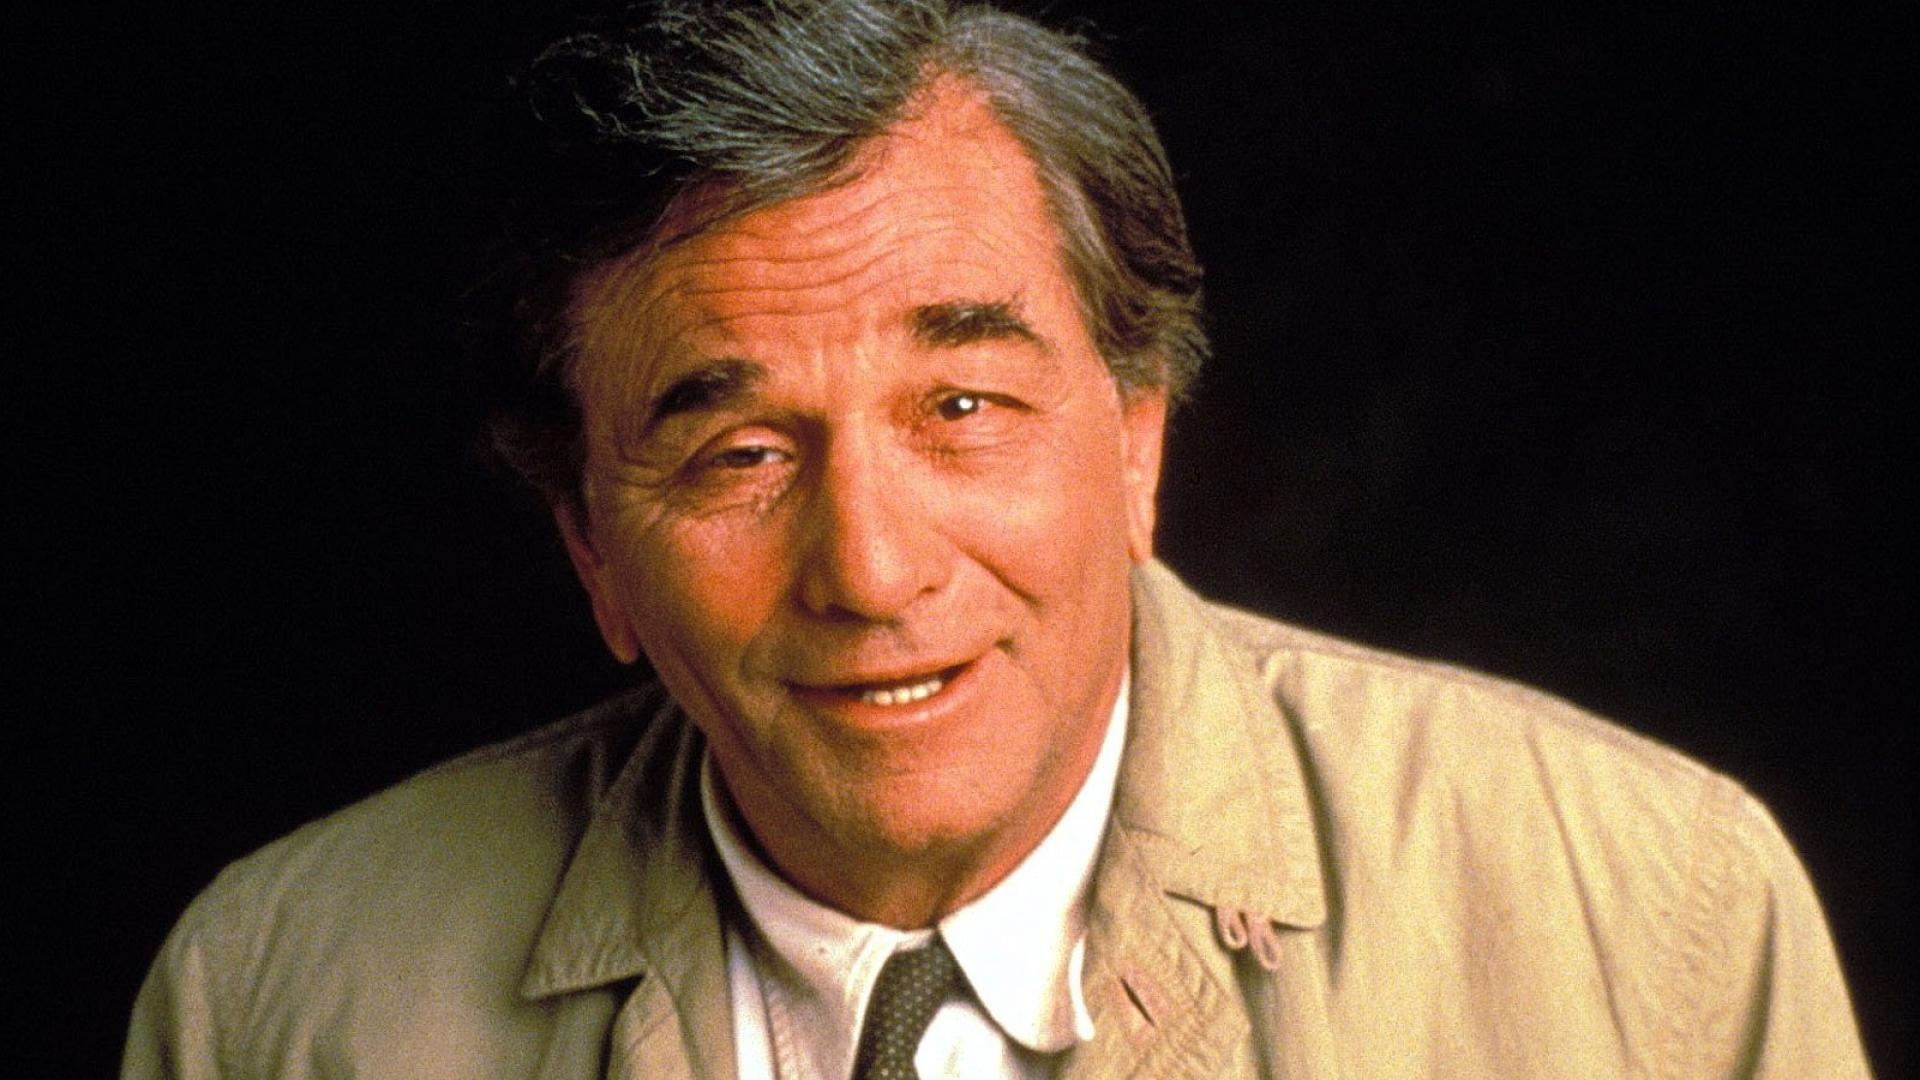 Peter Falk: A long-running series, Oscar Nominee, A character, Los Angeles police detective Lt. Columbo. 1920x1080 Full HD Wallpaper.